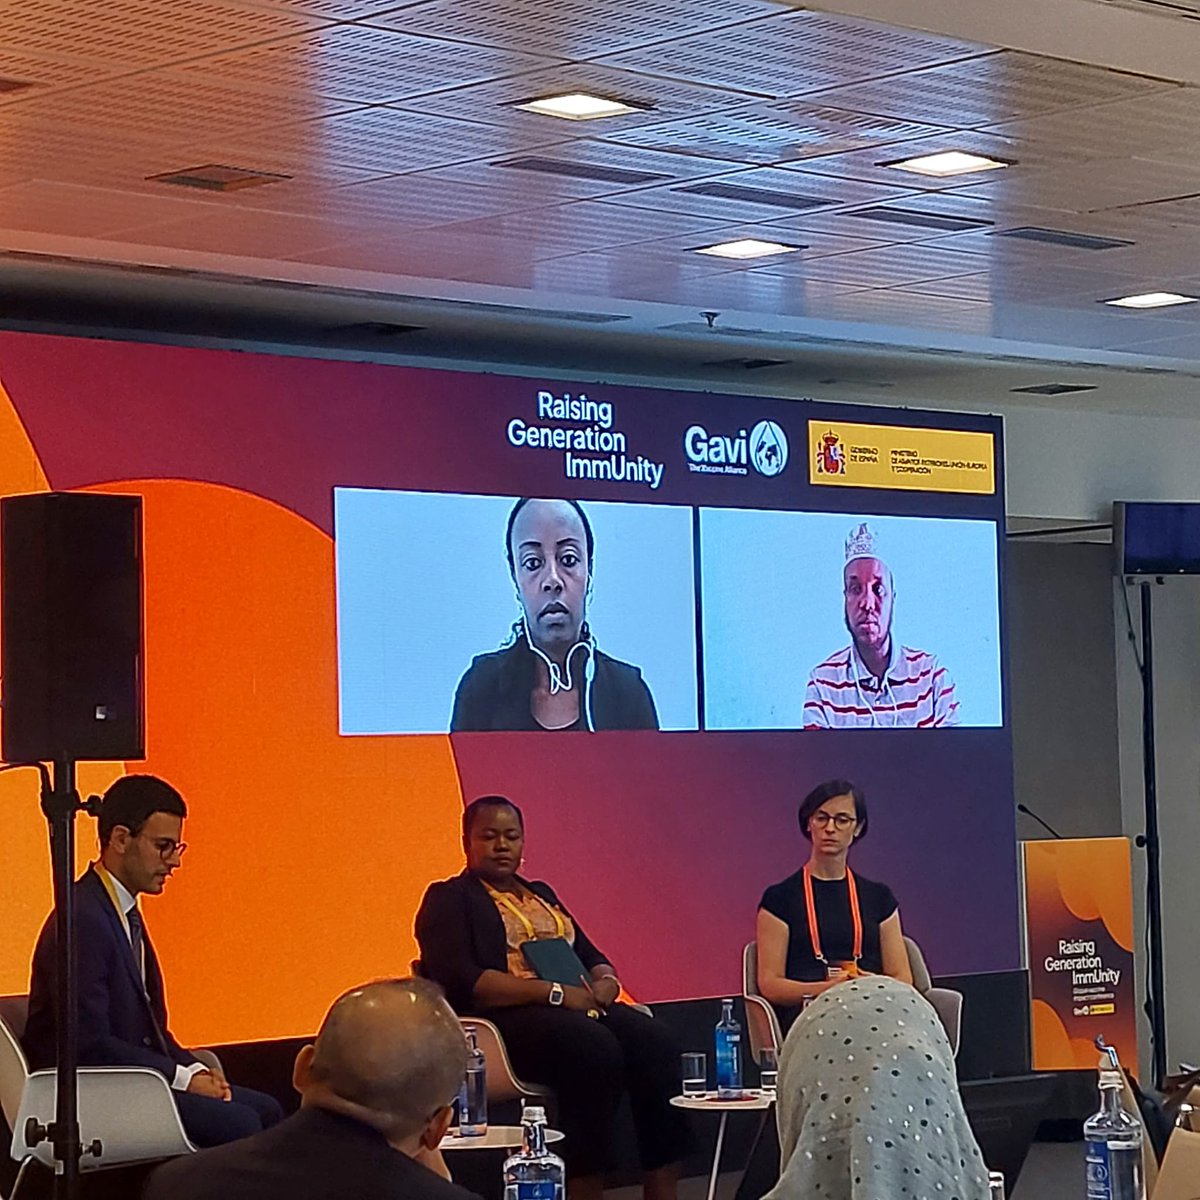 As part of a panel hosted by @SaveChildren during the MTR, we discussed the Zero-Dose Children challenge and the vital role of CSOs in achieving zero dose. Kudos to @DrEndie for shedding light on CSO contributions and Nigeria's dynamic situation.  #ZeroDoseChildren